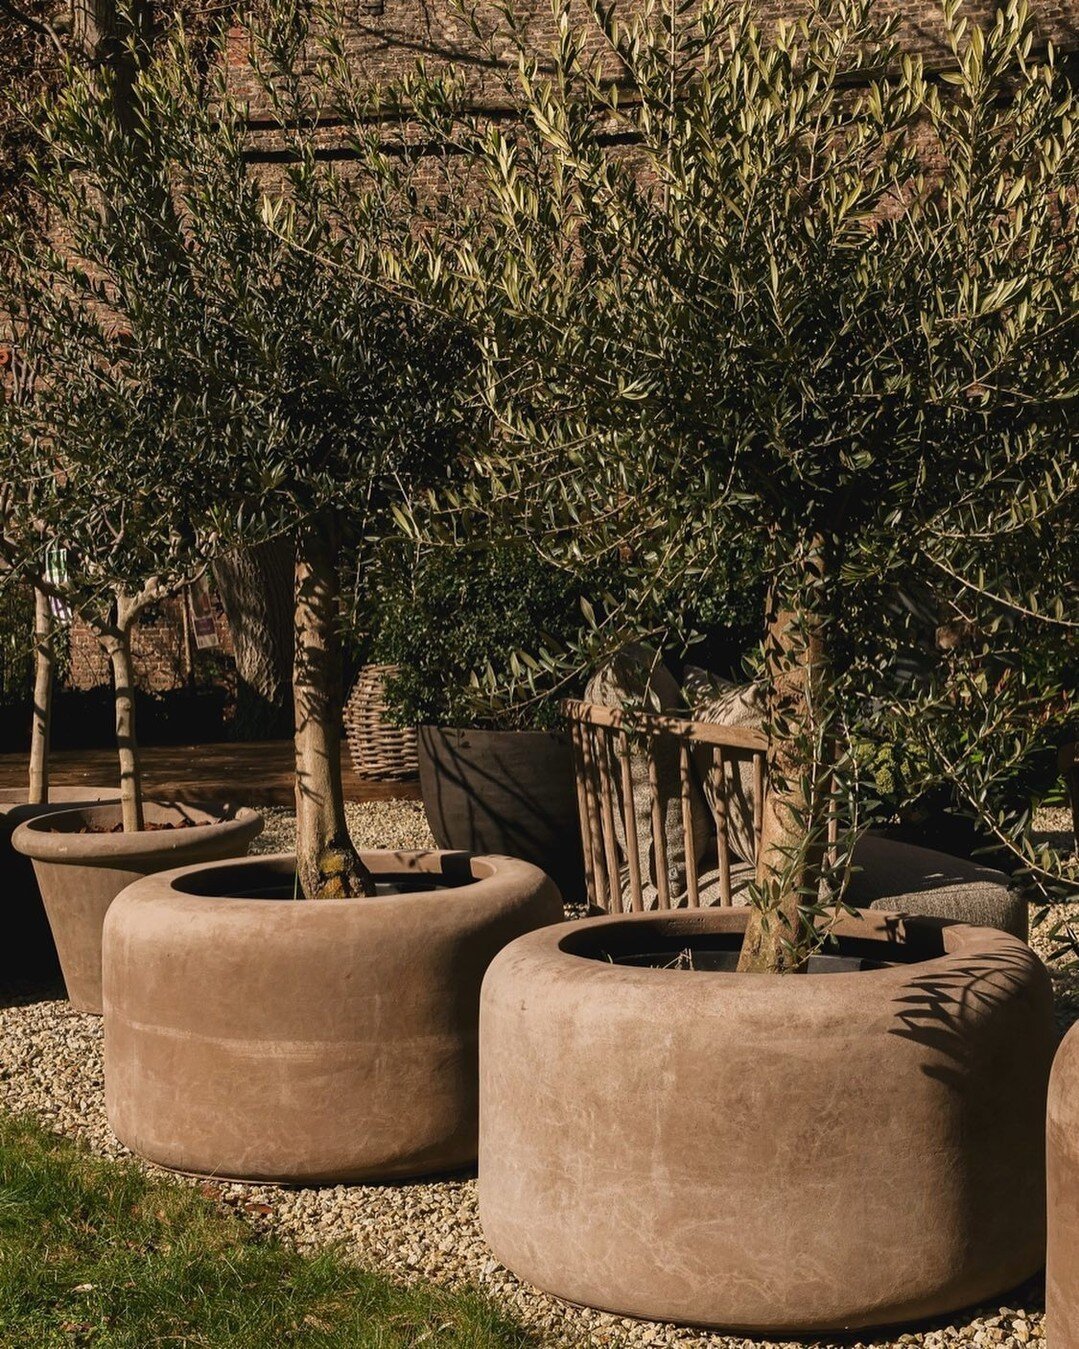 So.. I'm really going to need one of these pots. Best get myself a mature olive while I'm at it. 🌳 😍⁠
⁠
📸 via @de.borght⁠
⁠
#gardengrowntrees #morningtonpeninsula #olivetrees #matureolives #olivegrove #exorchardolives #landscapedesignideas #planti